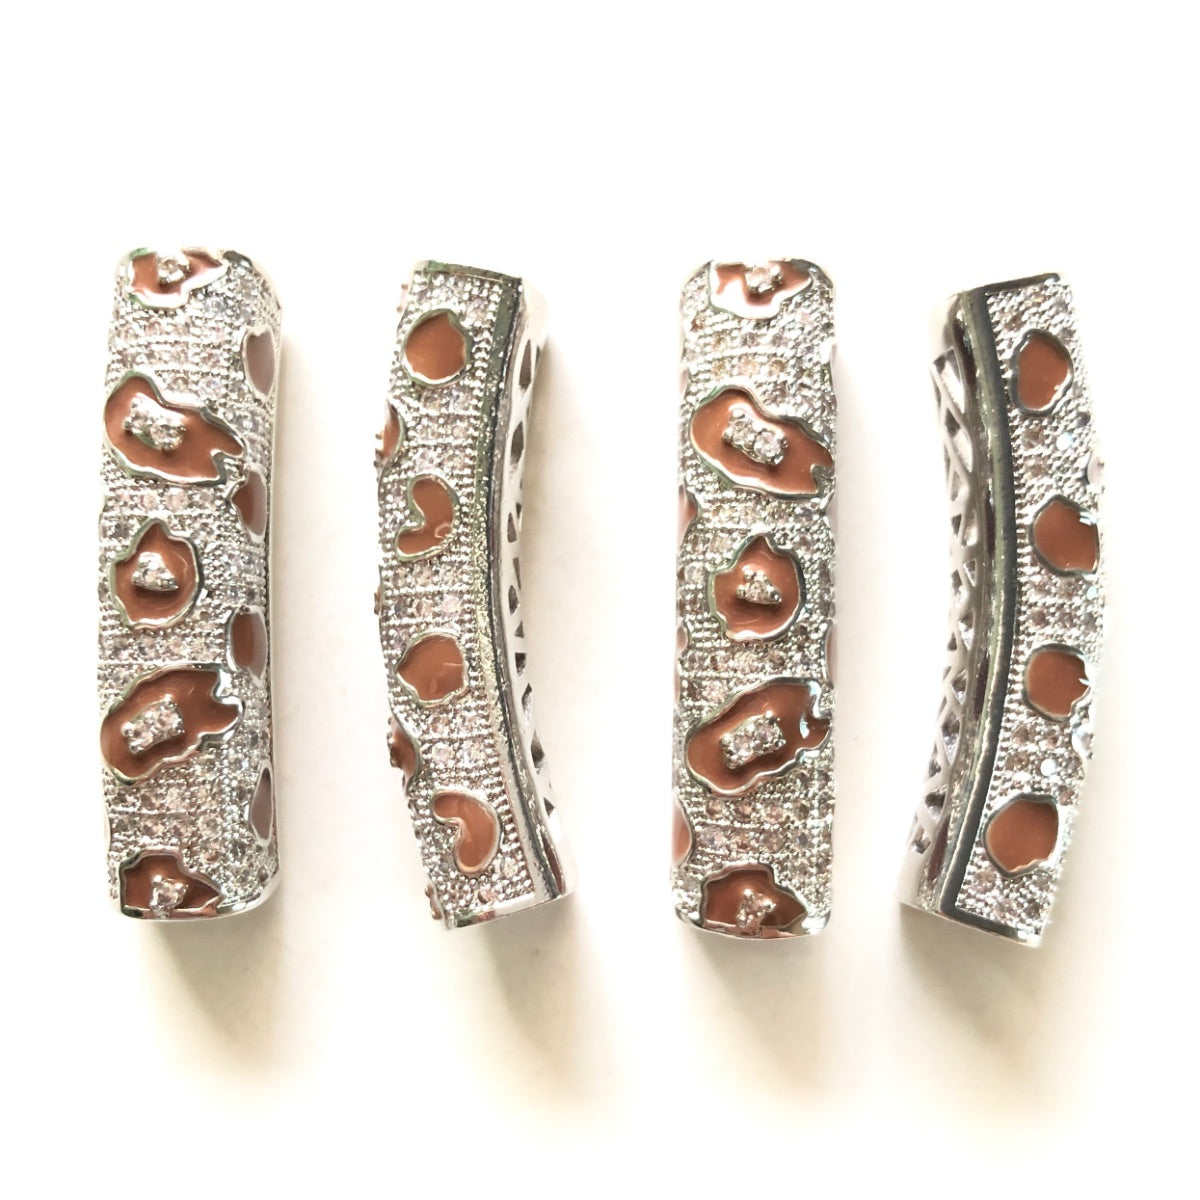 5-10pcs/lot 37.7*9mm Brown Enamel Leopard Print CZ Paved Tube Bar Spacers Silver CZ Paved Spacers Leopard Printed New Spacers Arrivals Tube Bar Centerpieces Charms Beads Beyond